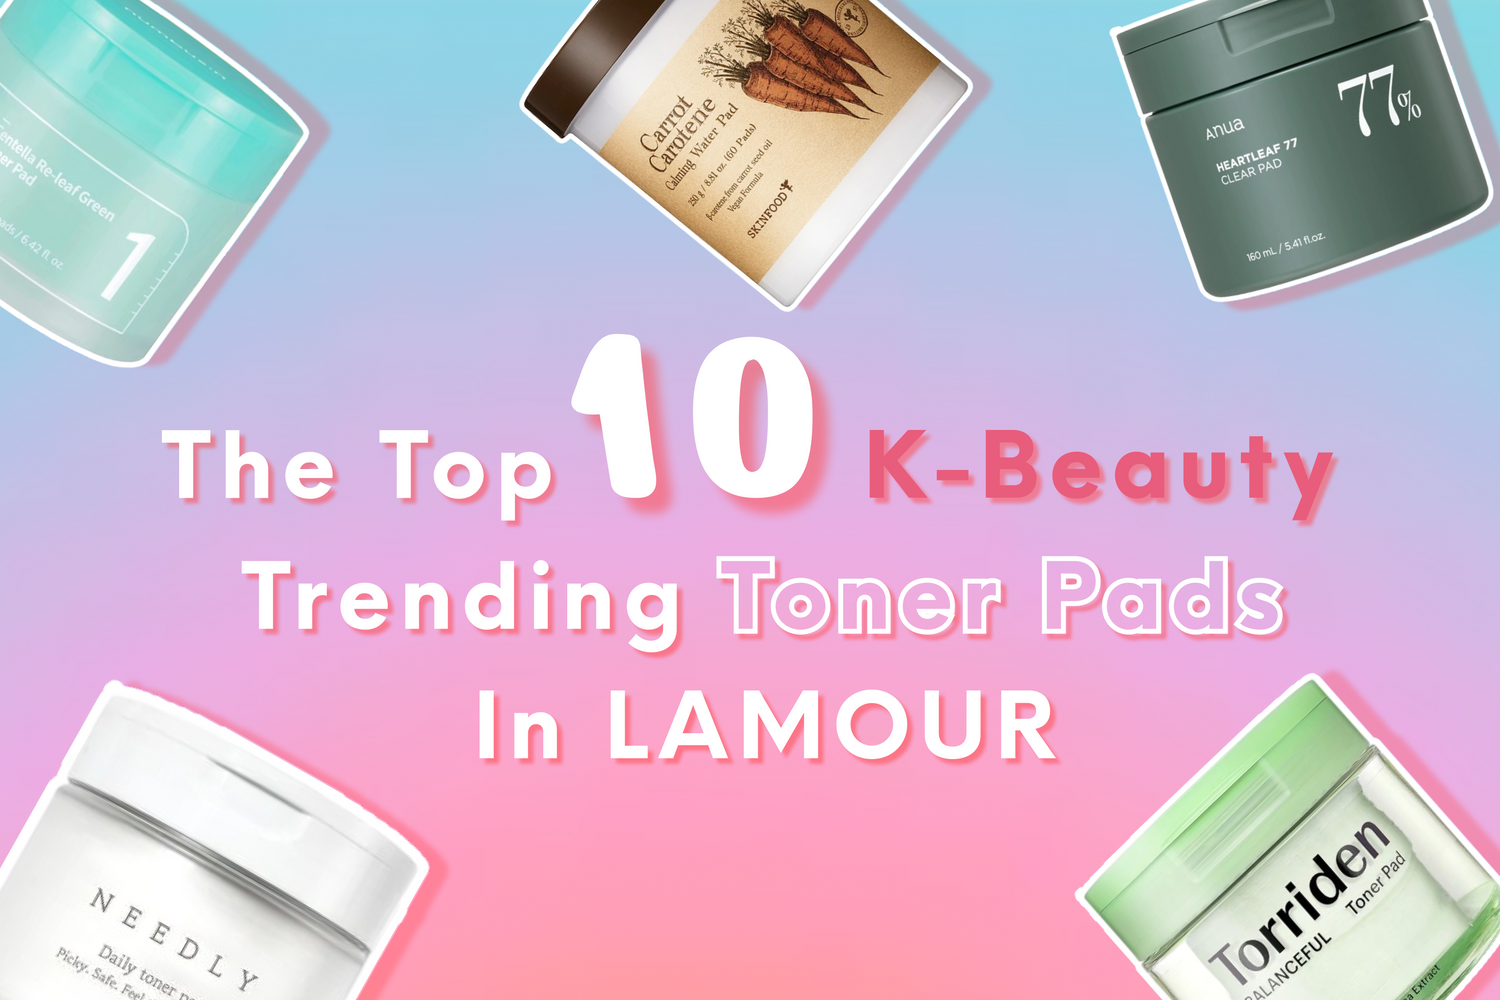 The Top 10 K-Beauty Trending Toner pads in LAMOUR